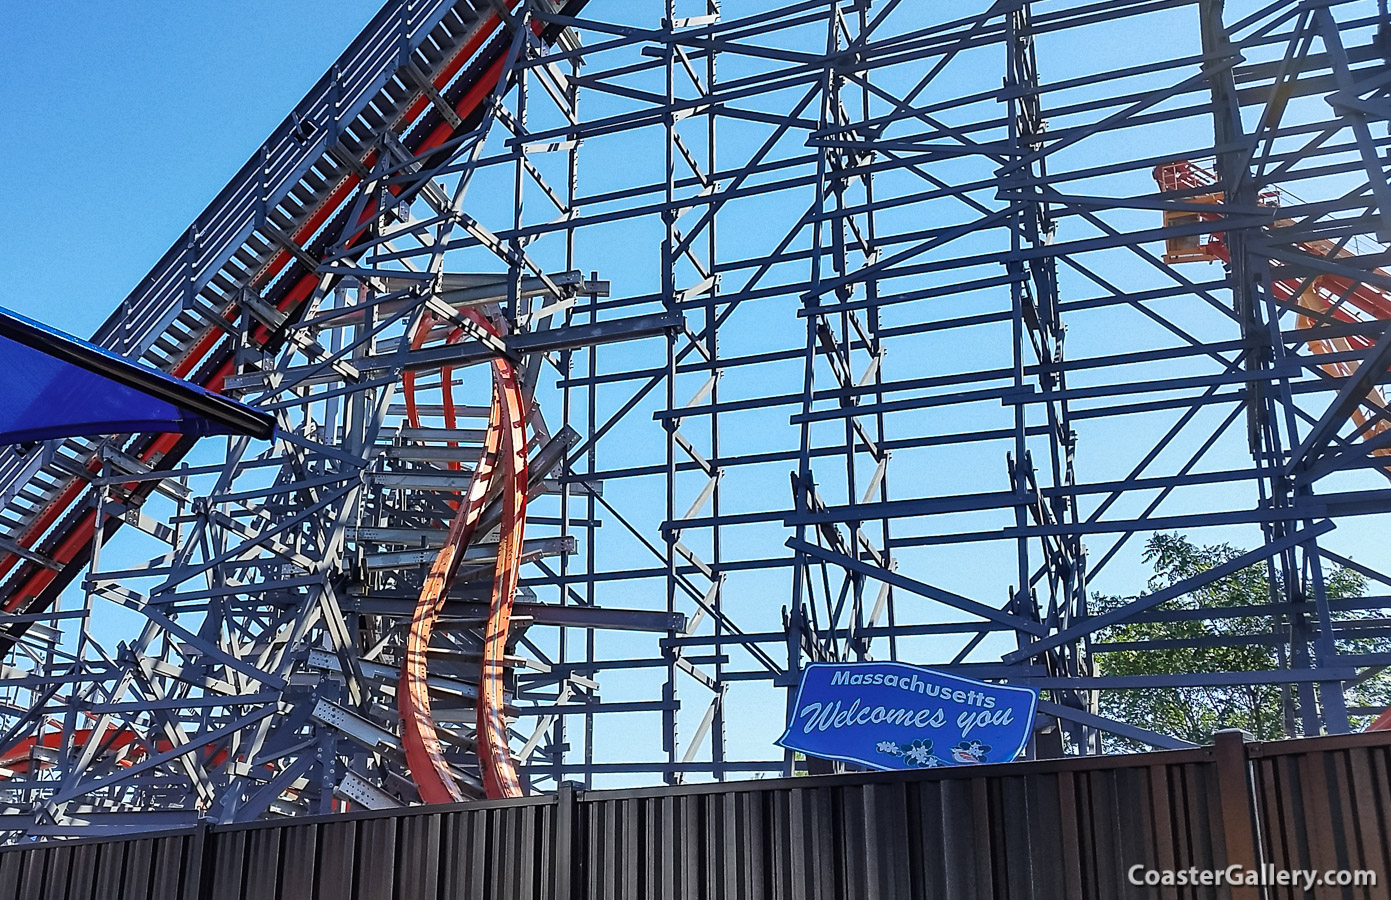 Inversions on the Wicked Cyclone RMC roller coaster at Six Flags New England